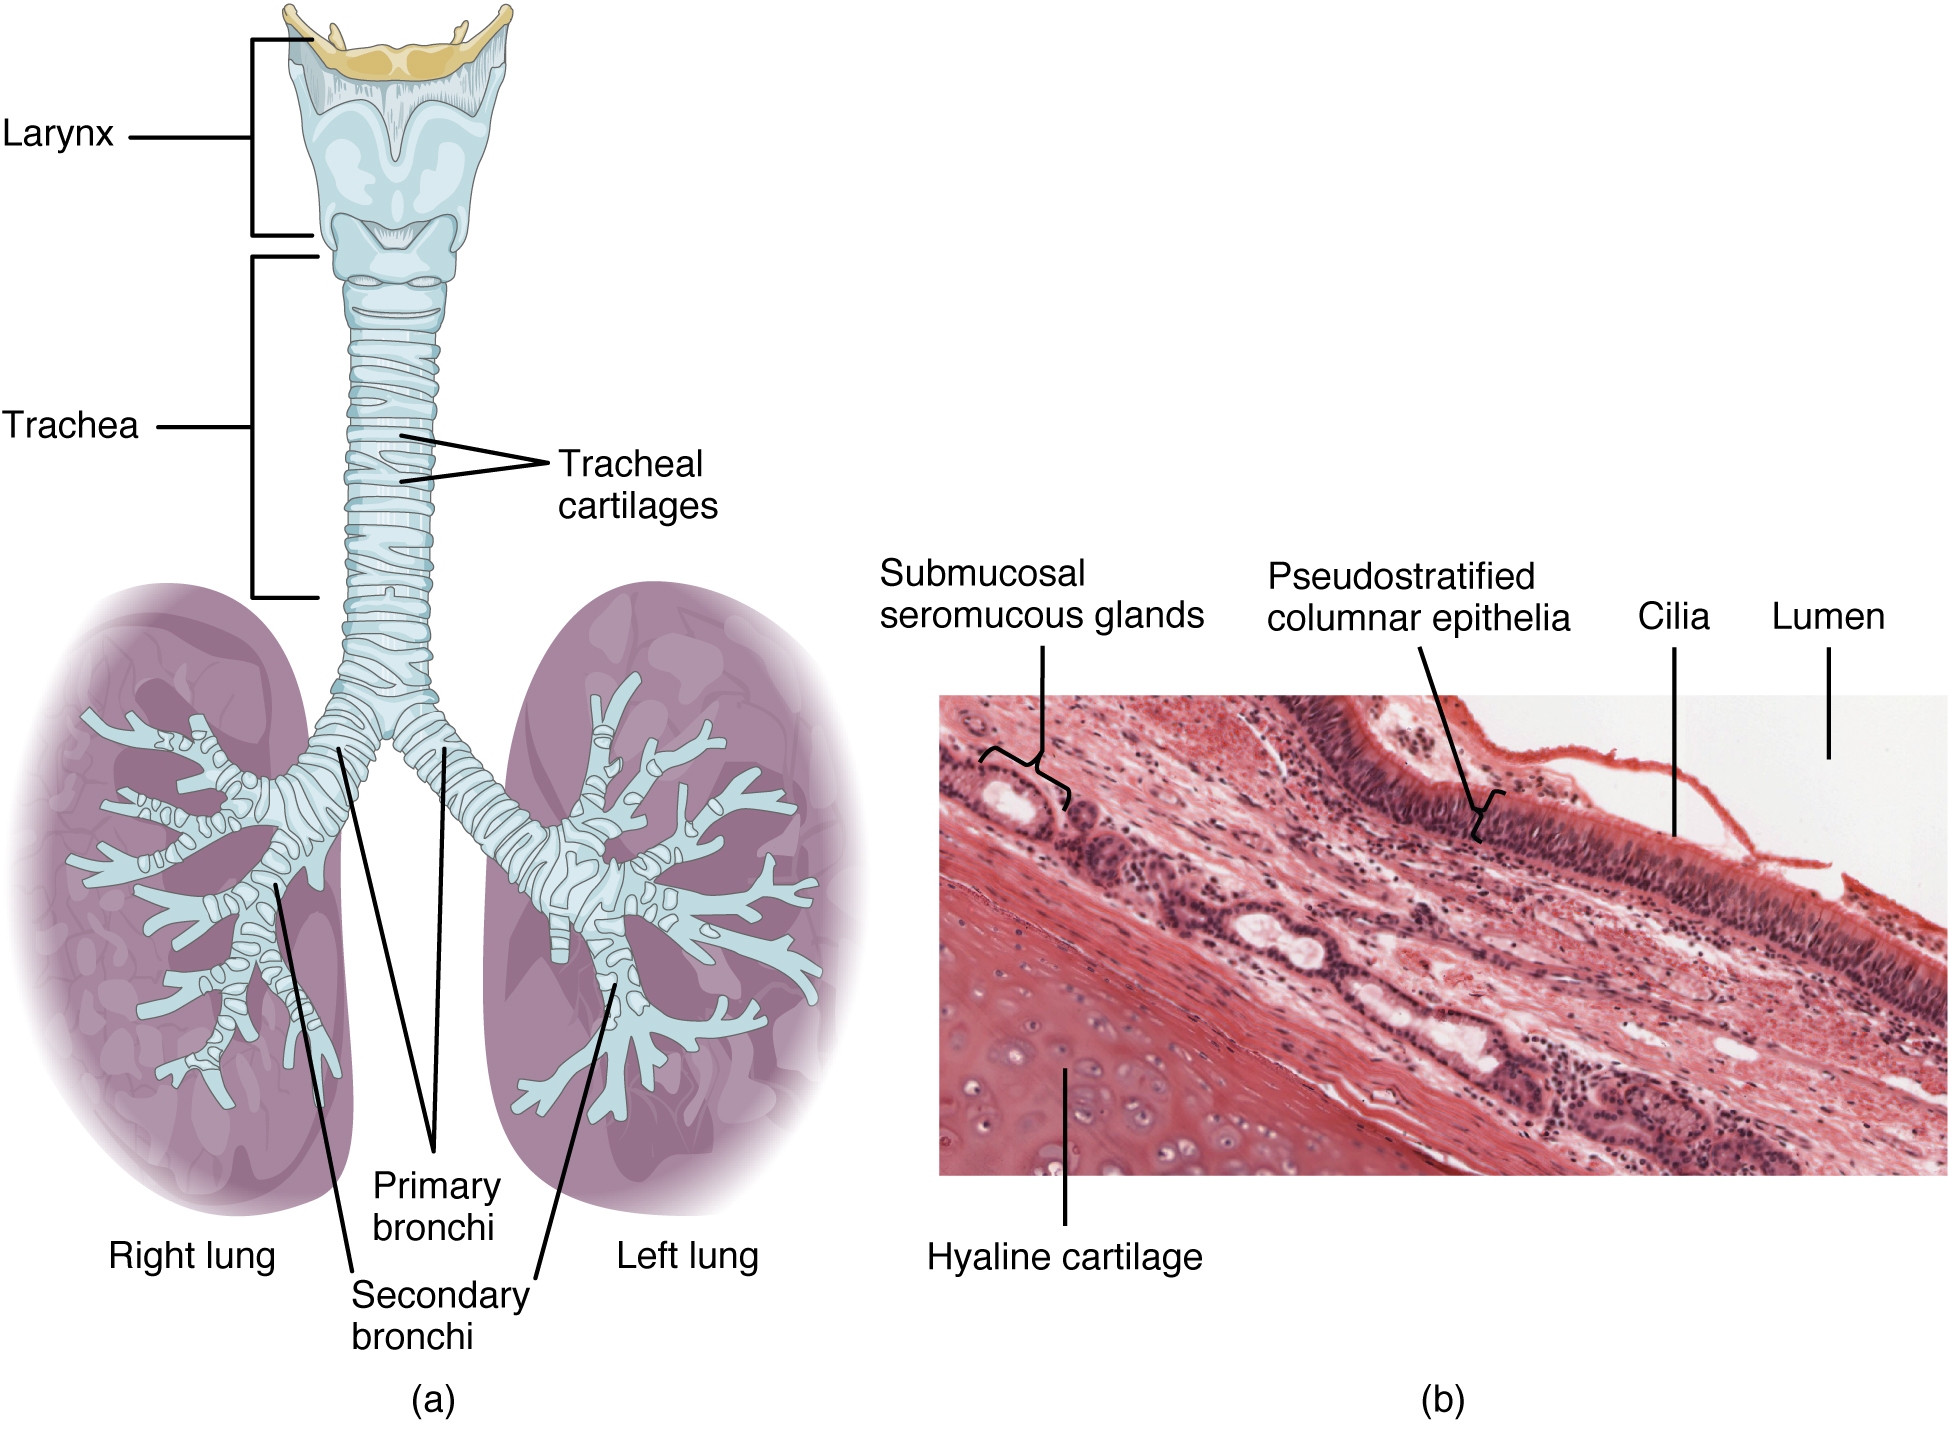 The top panel of this figure shows the trachea and its organs. The major parts including the larynx, trachea, bronchi, and lungs are labeled.